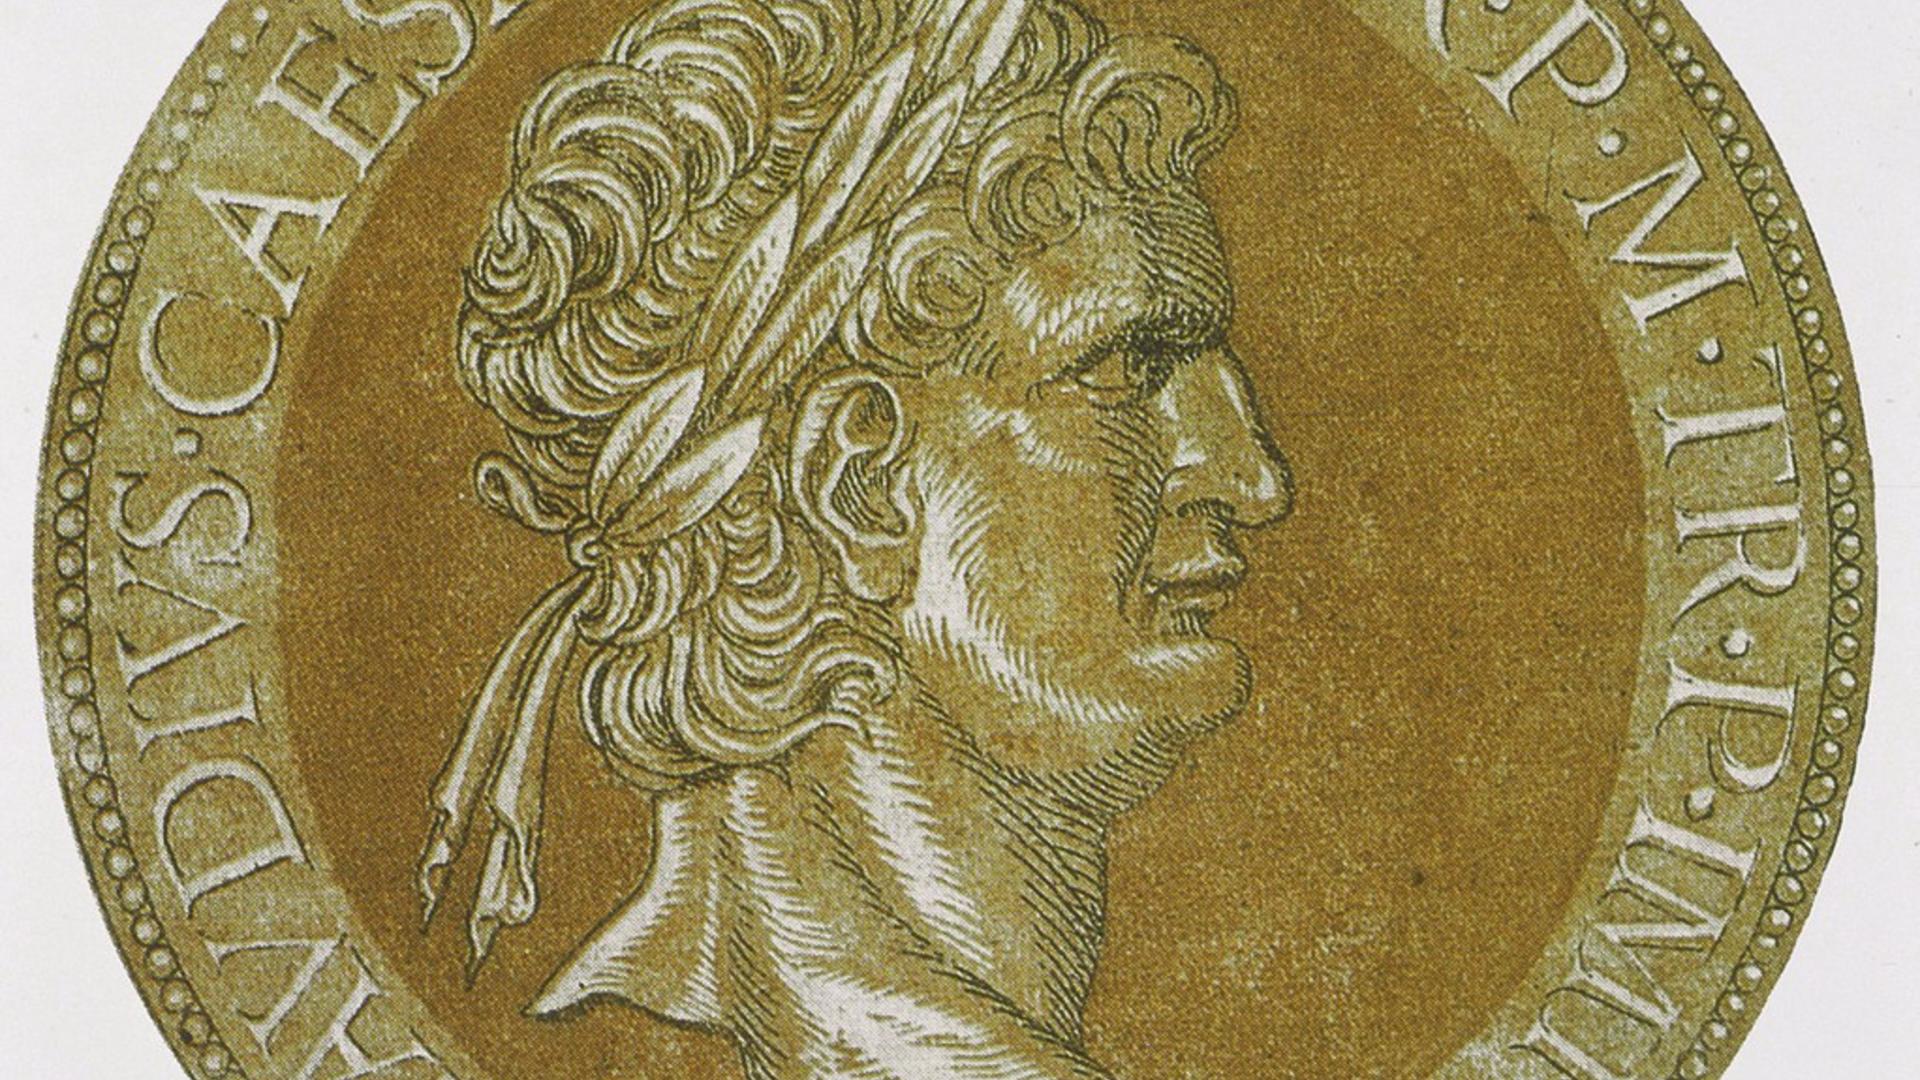 Portrait of Emperor Nero, 1557, two-colors print (etching and woodcut), Antwerp, Museum Plantin-Moretus